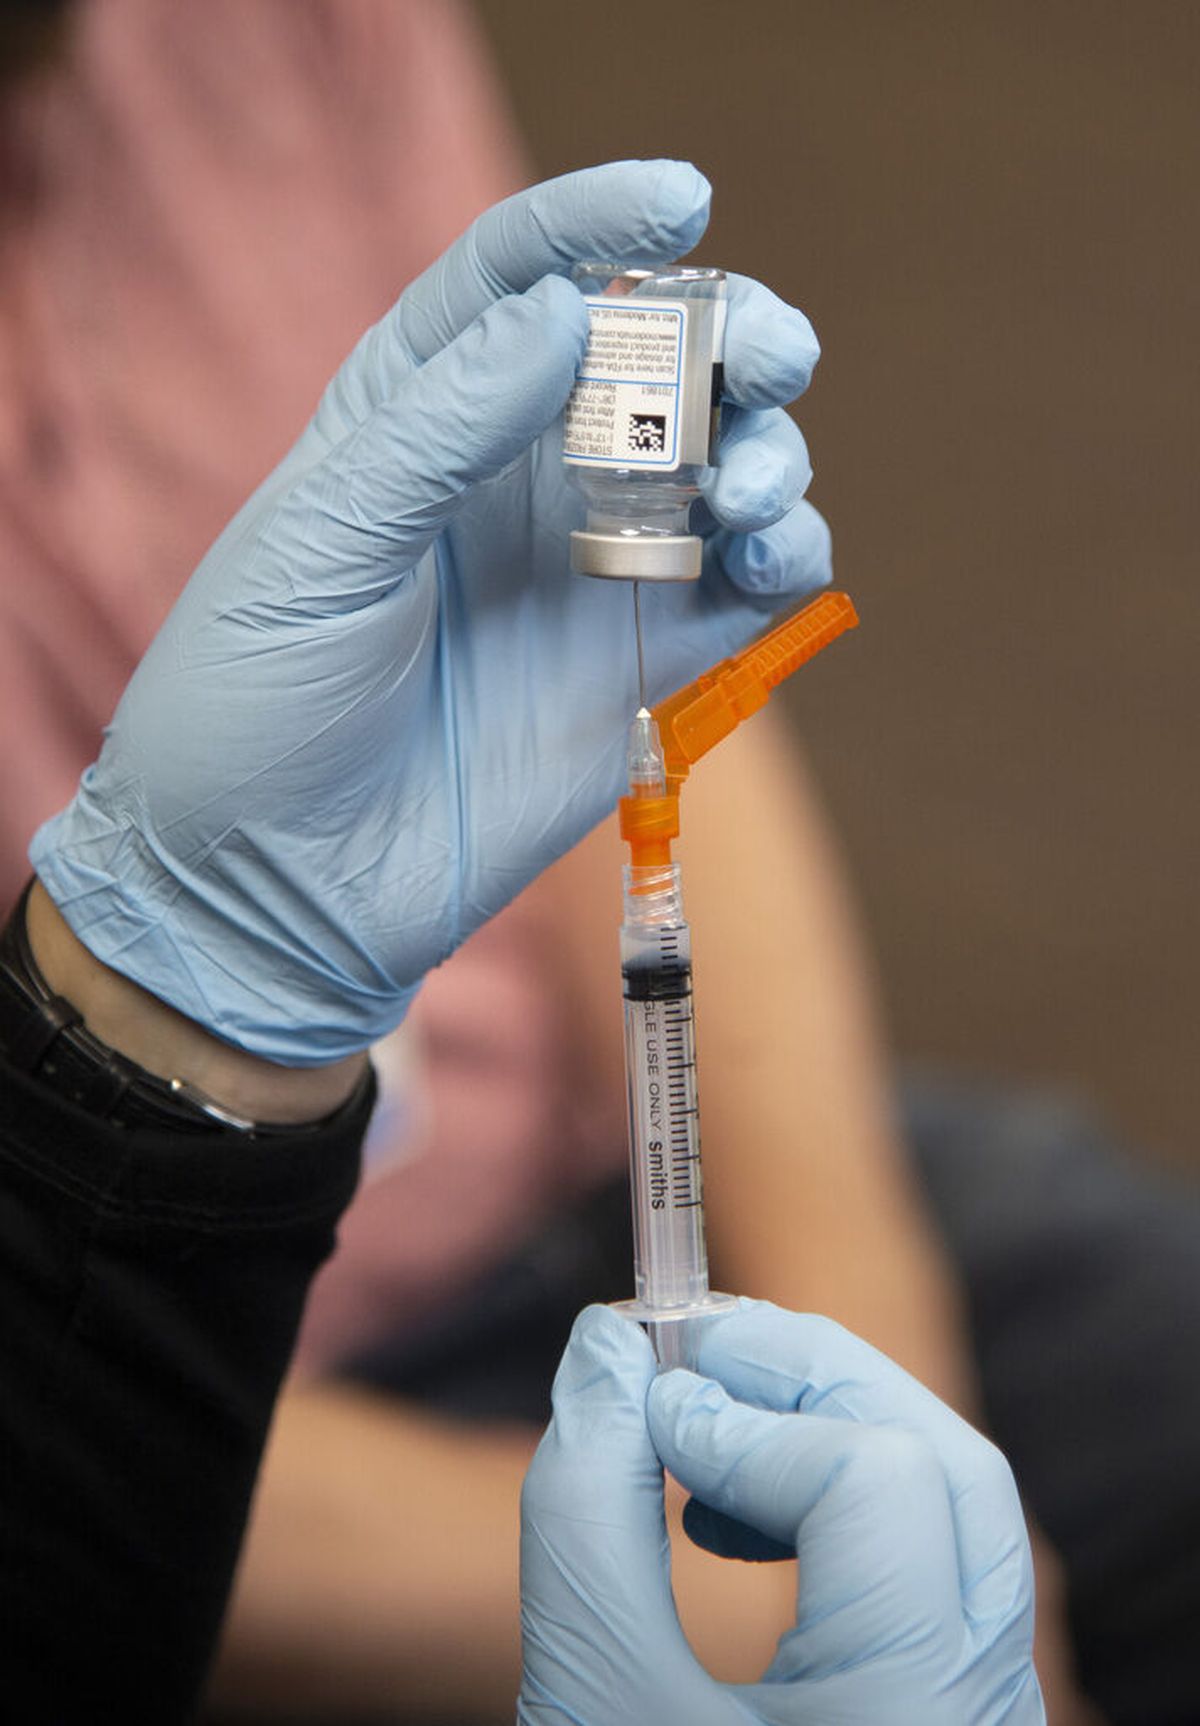 The state announced new vaccination plans this week. However, local officials were not privy to the details, including turning the Spokane Veterans Memorial Arena into a mass vaccination clinic.  (Jesse Tinsley/The Spokesman-Review)